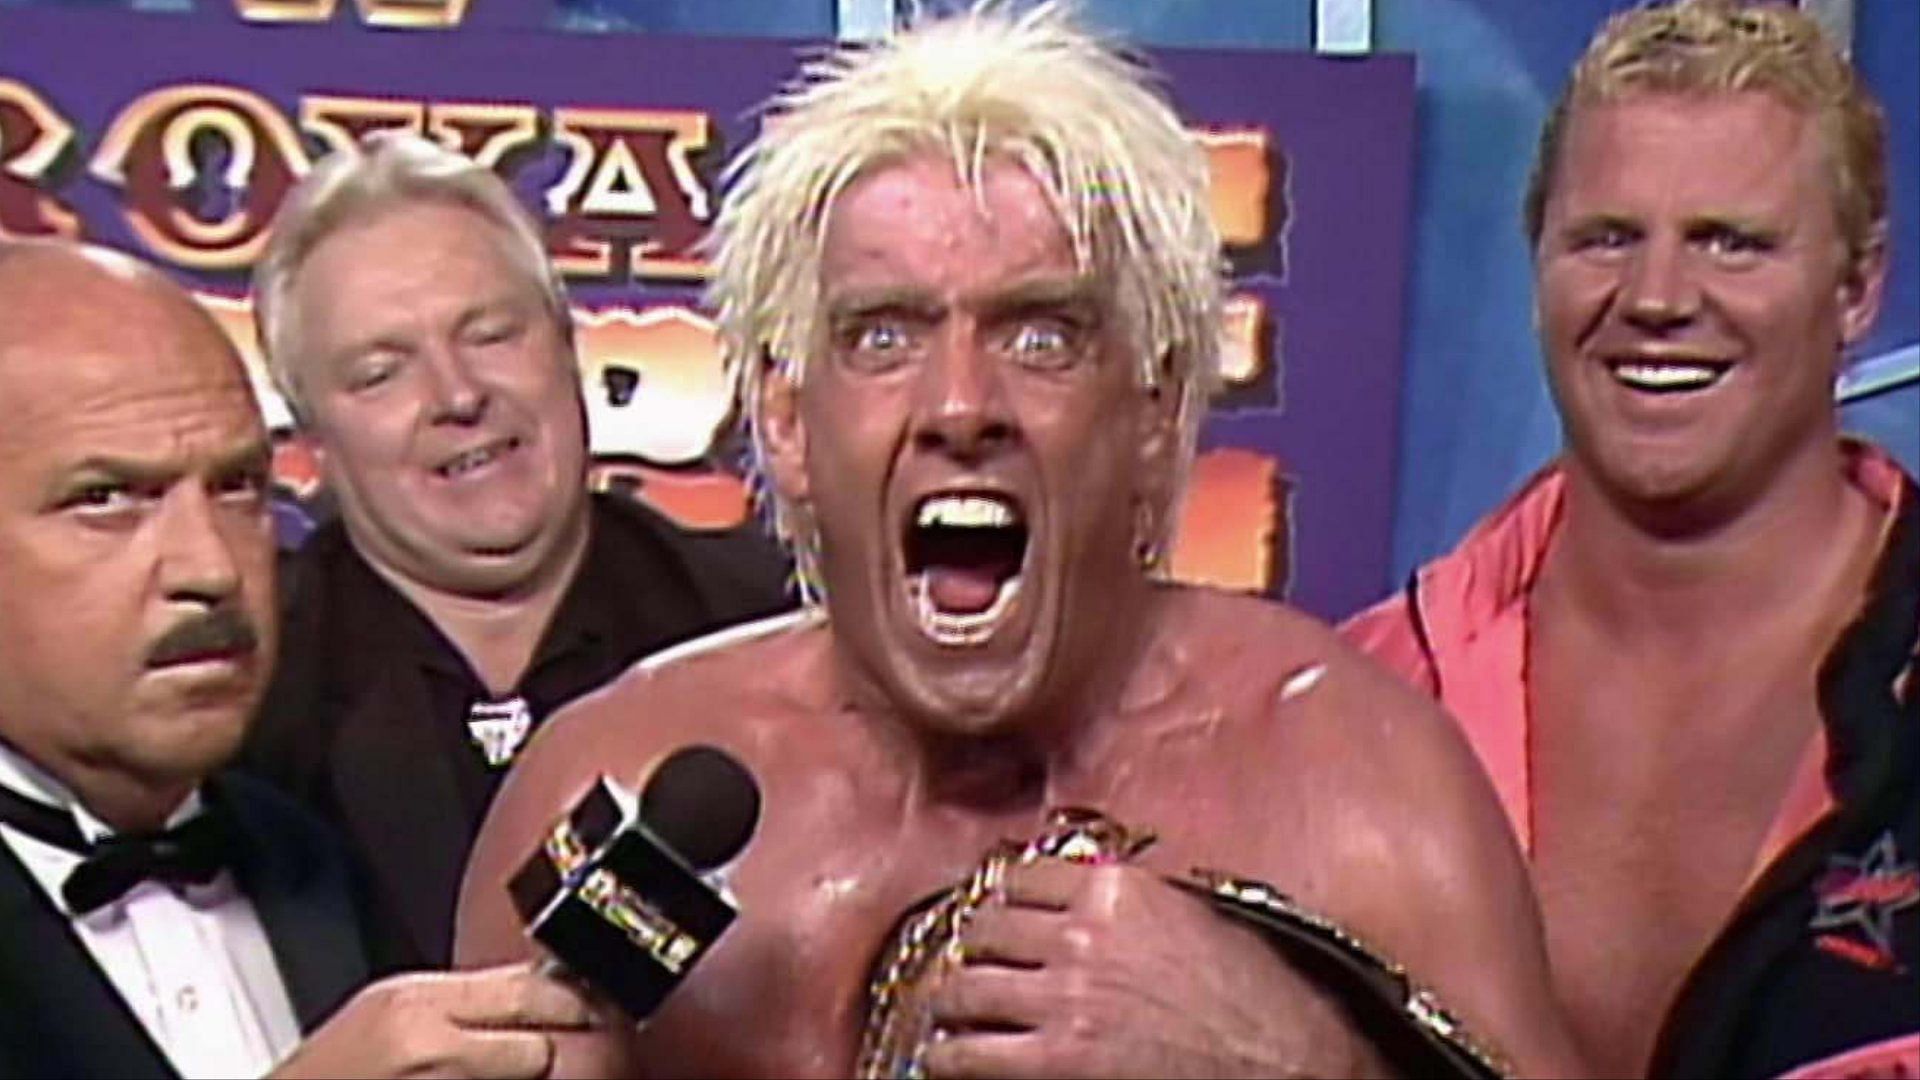 Ric Flair is a former United States Champion